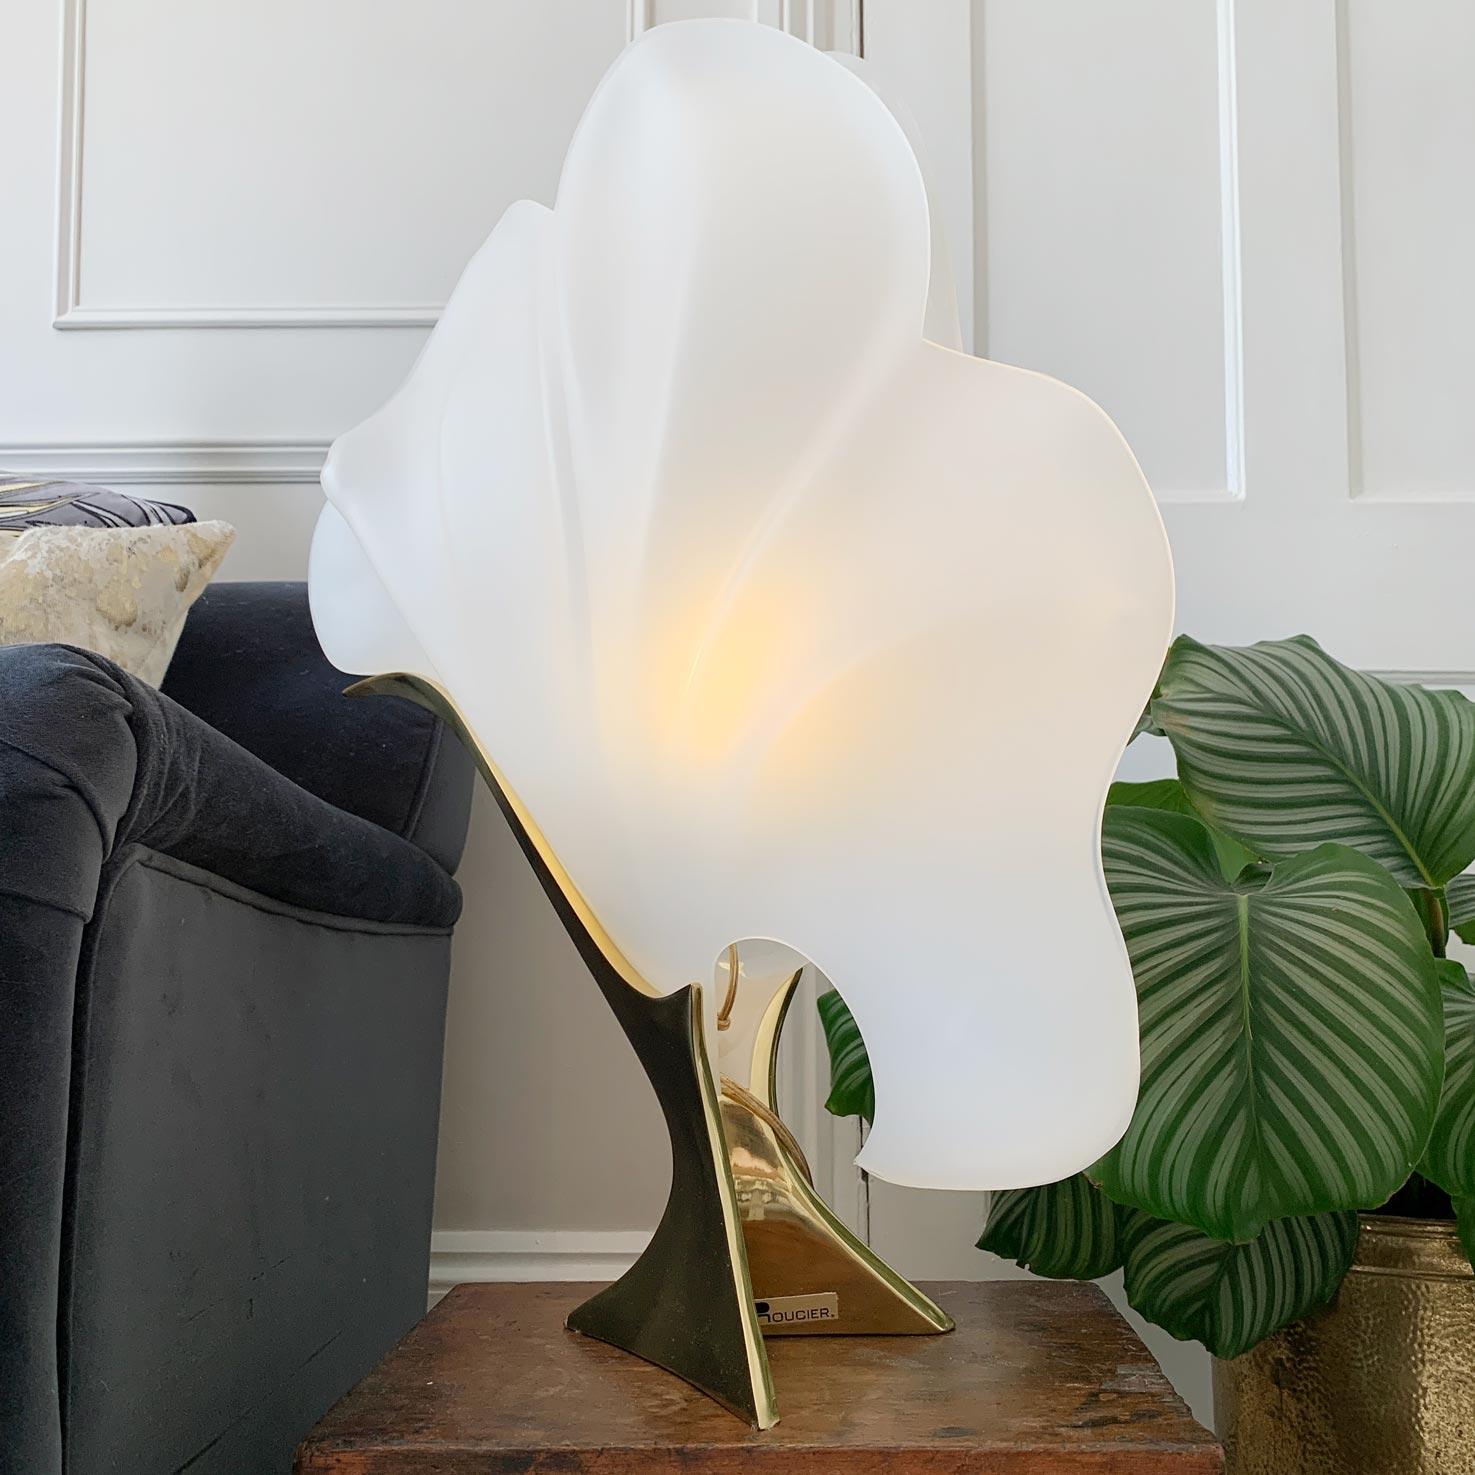 This incredibly sleek and highly dramatic table lamp is crafted from frosted opaline acrylic in the form of naturalistic shells, these in turn are set upon a solid brass foot
An impressive statement lamp of large size and elegant form

The